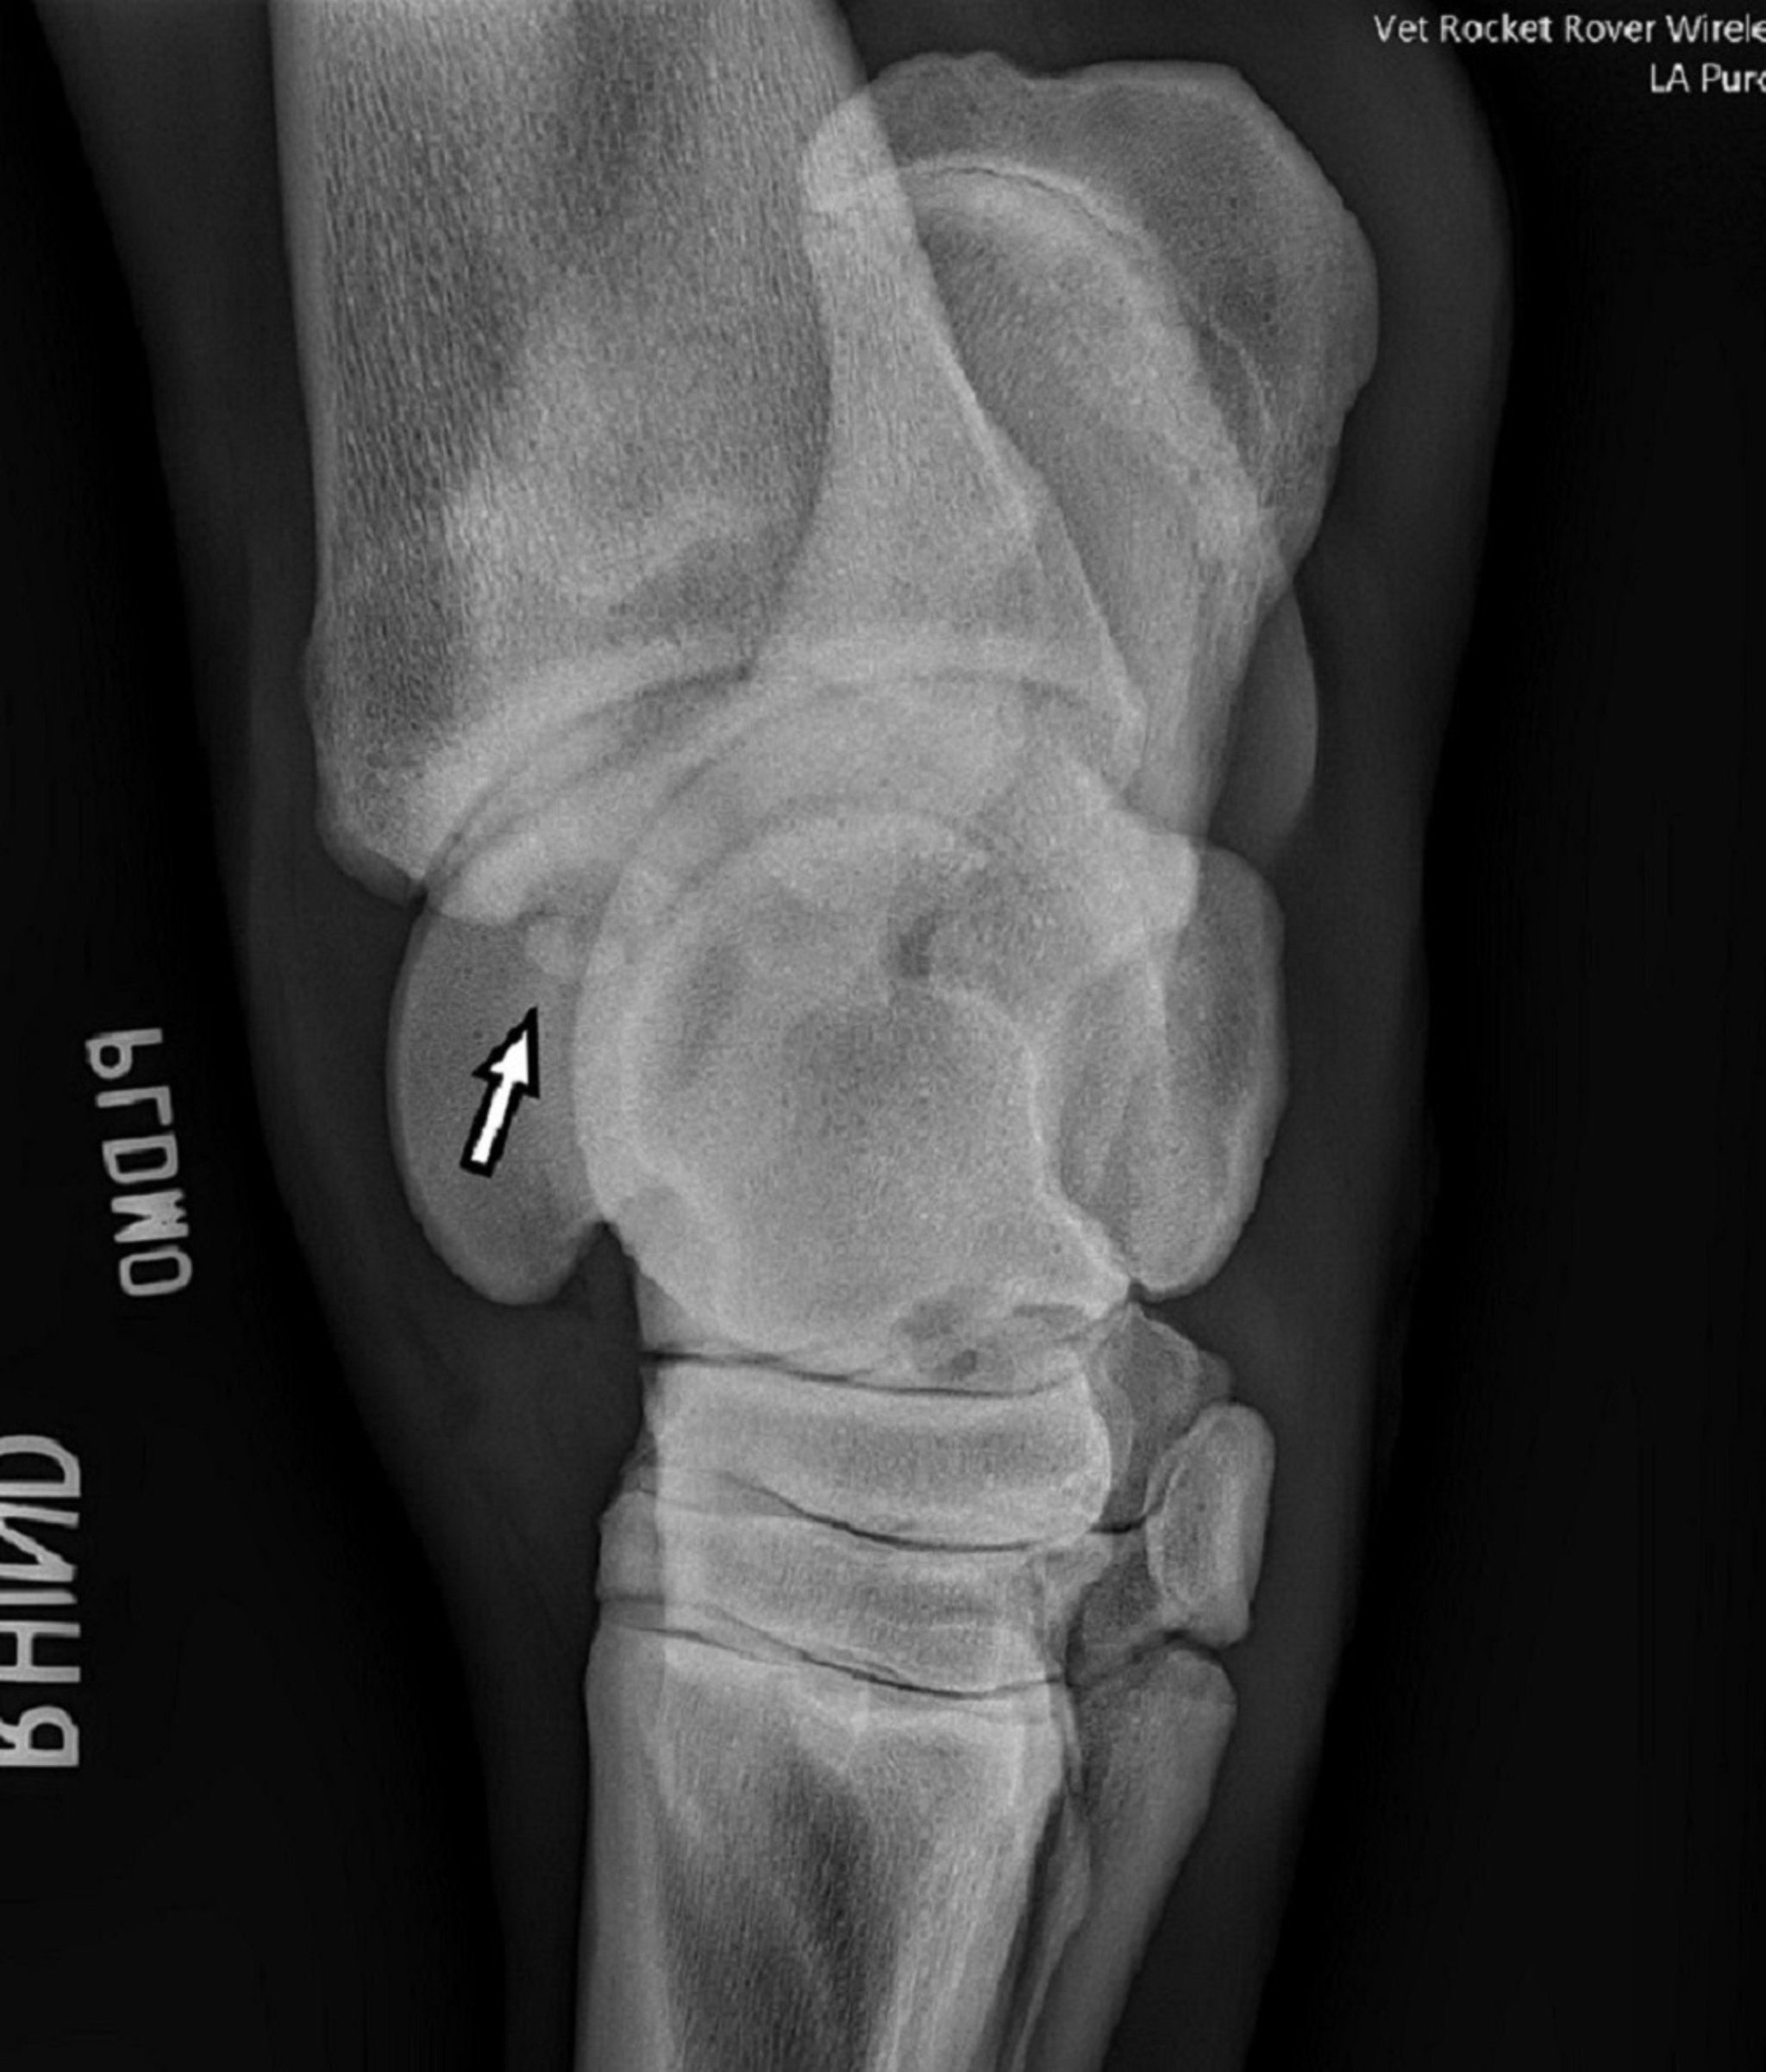 Osteochondritis dissecans, tarsocrural joint, horse, radiographic view